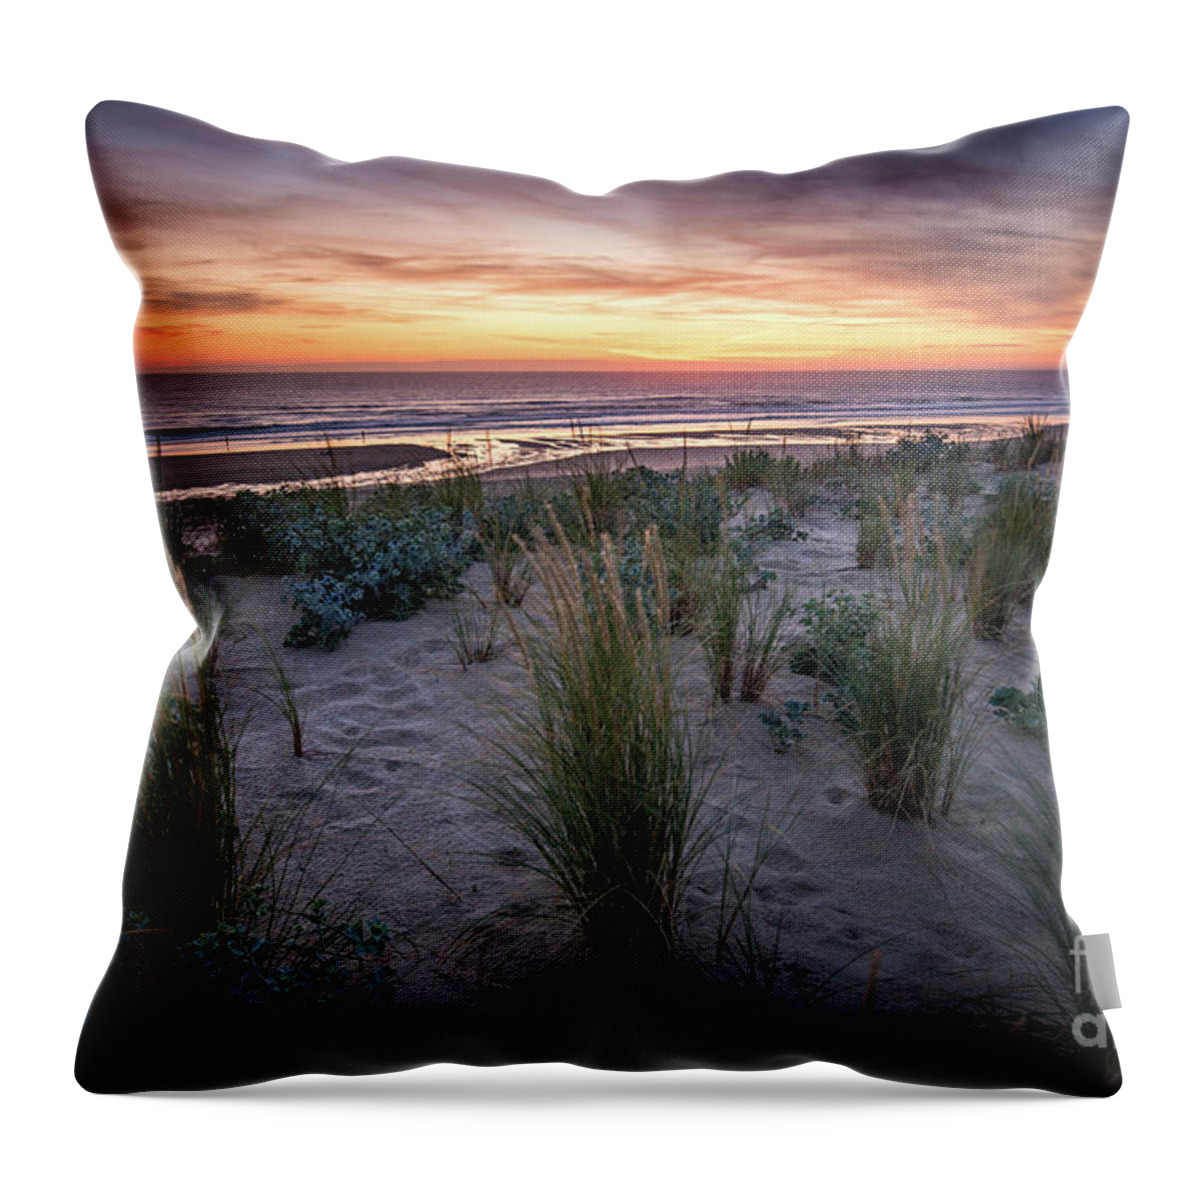 Natural Landscape Throw Pillow featuring the photograph The Dunes In The Sunset Light by Hannes Cmarits